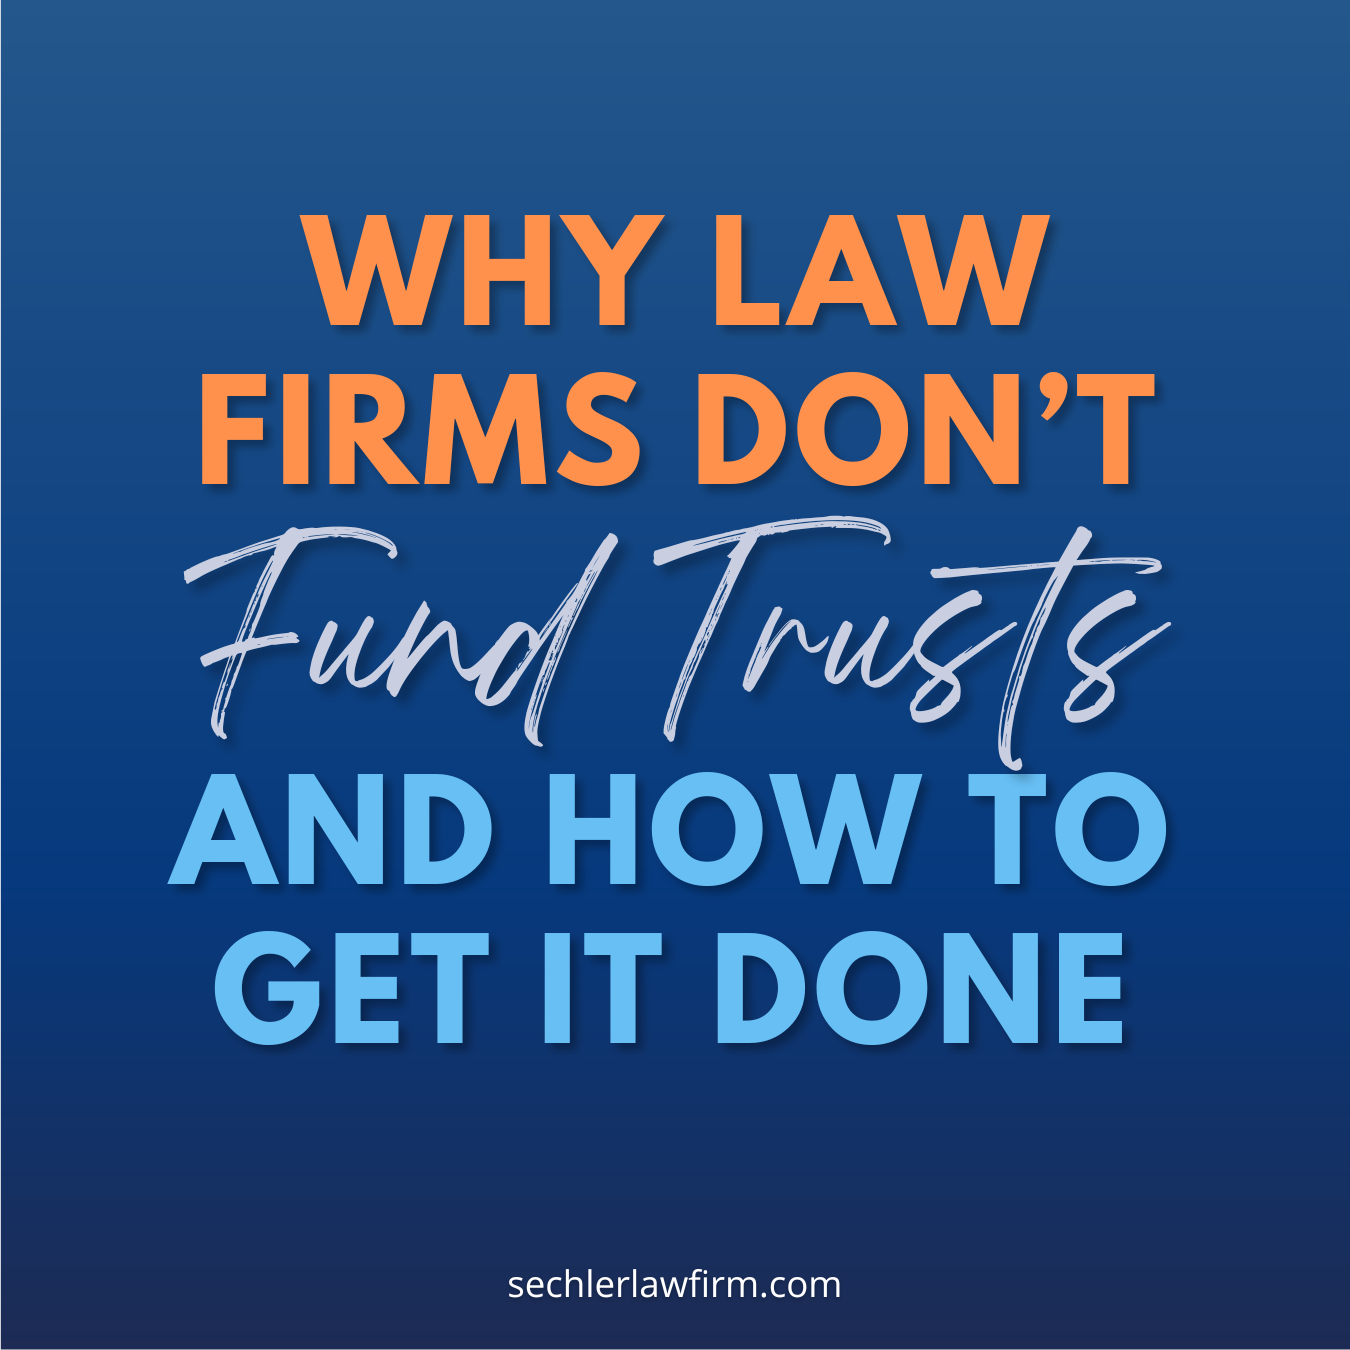 Why Law Firms Don’t Fund Trusts and How To Get It Done